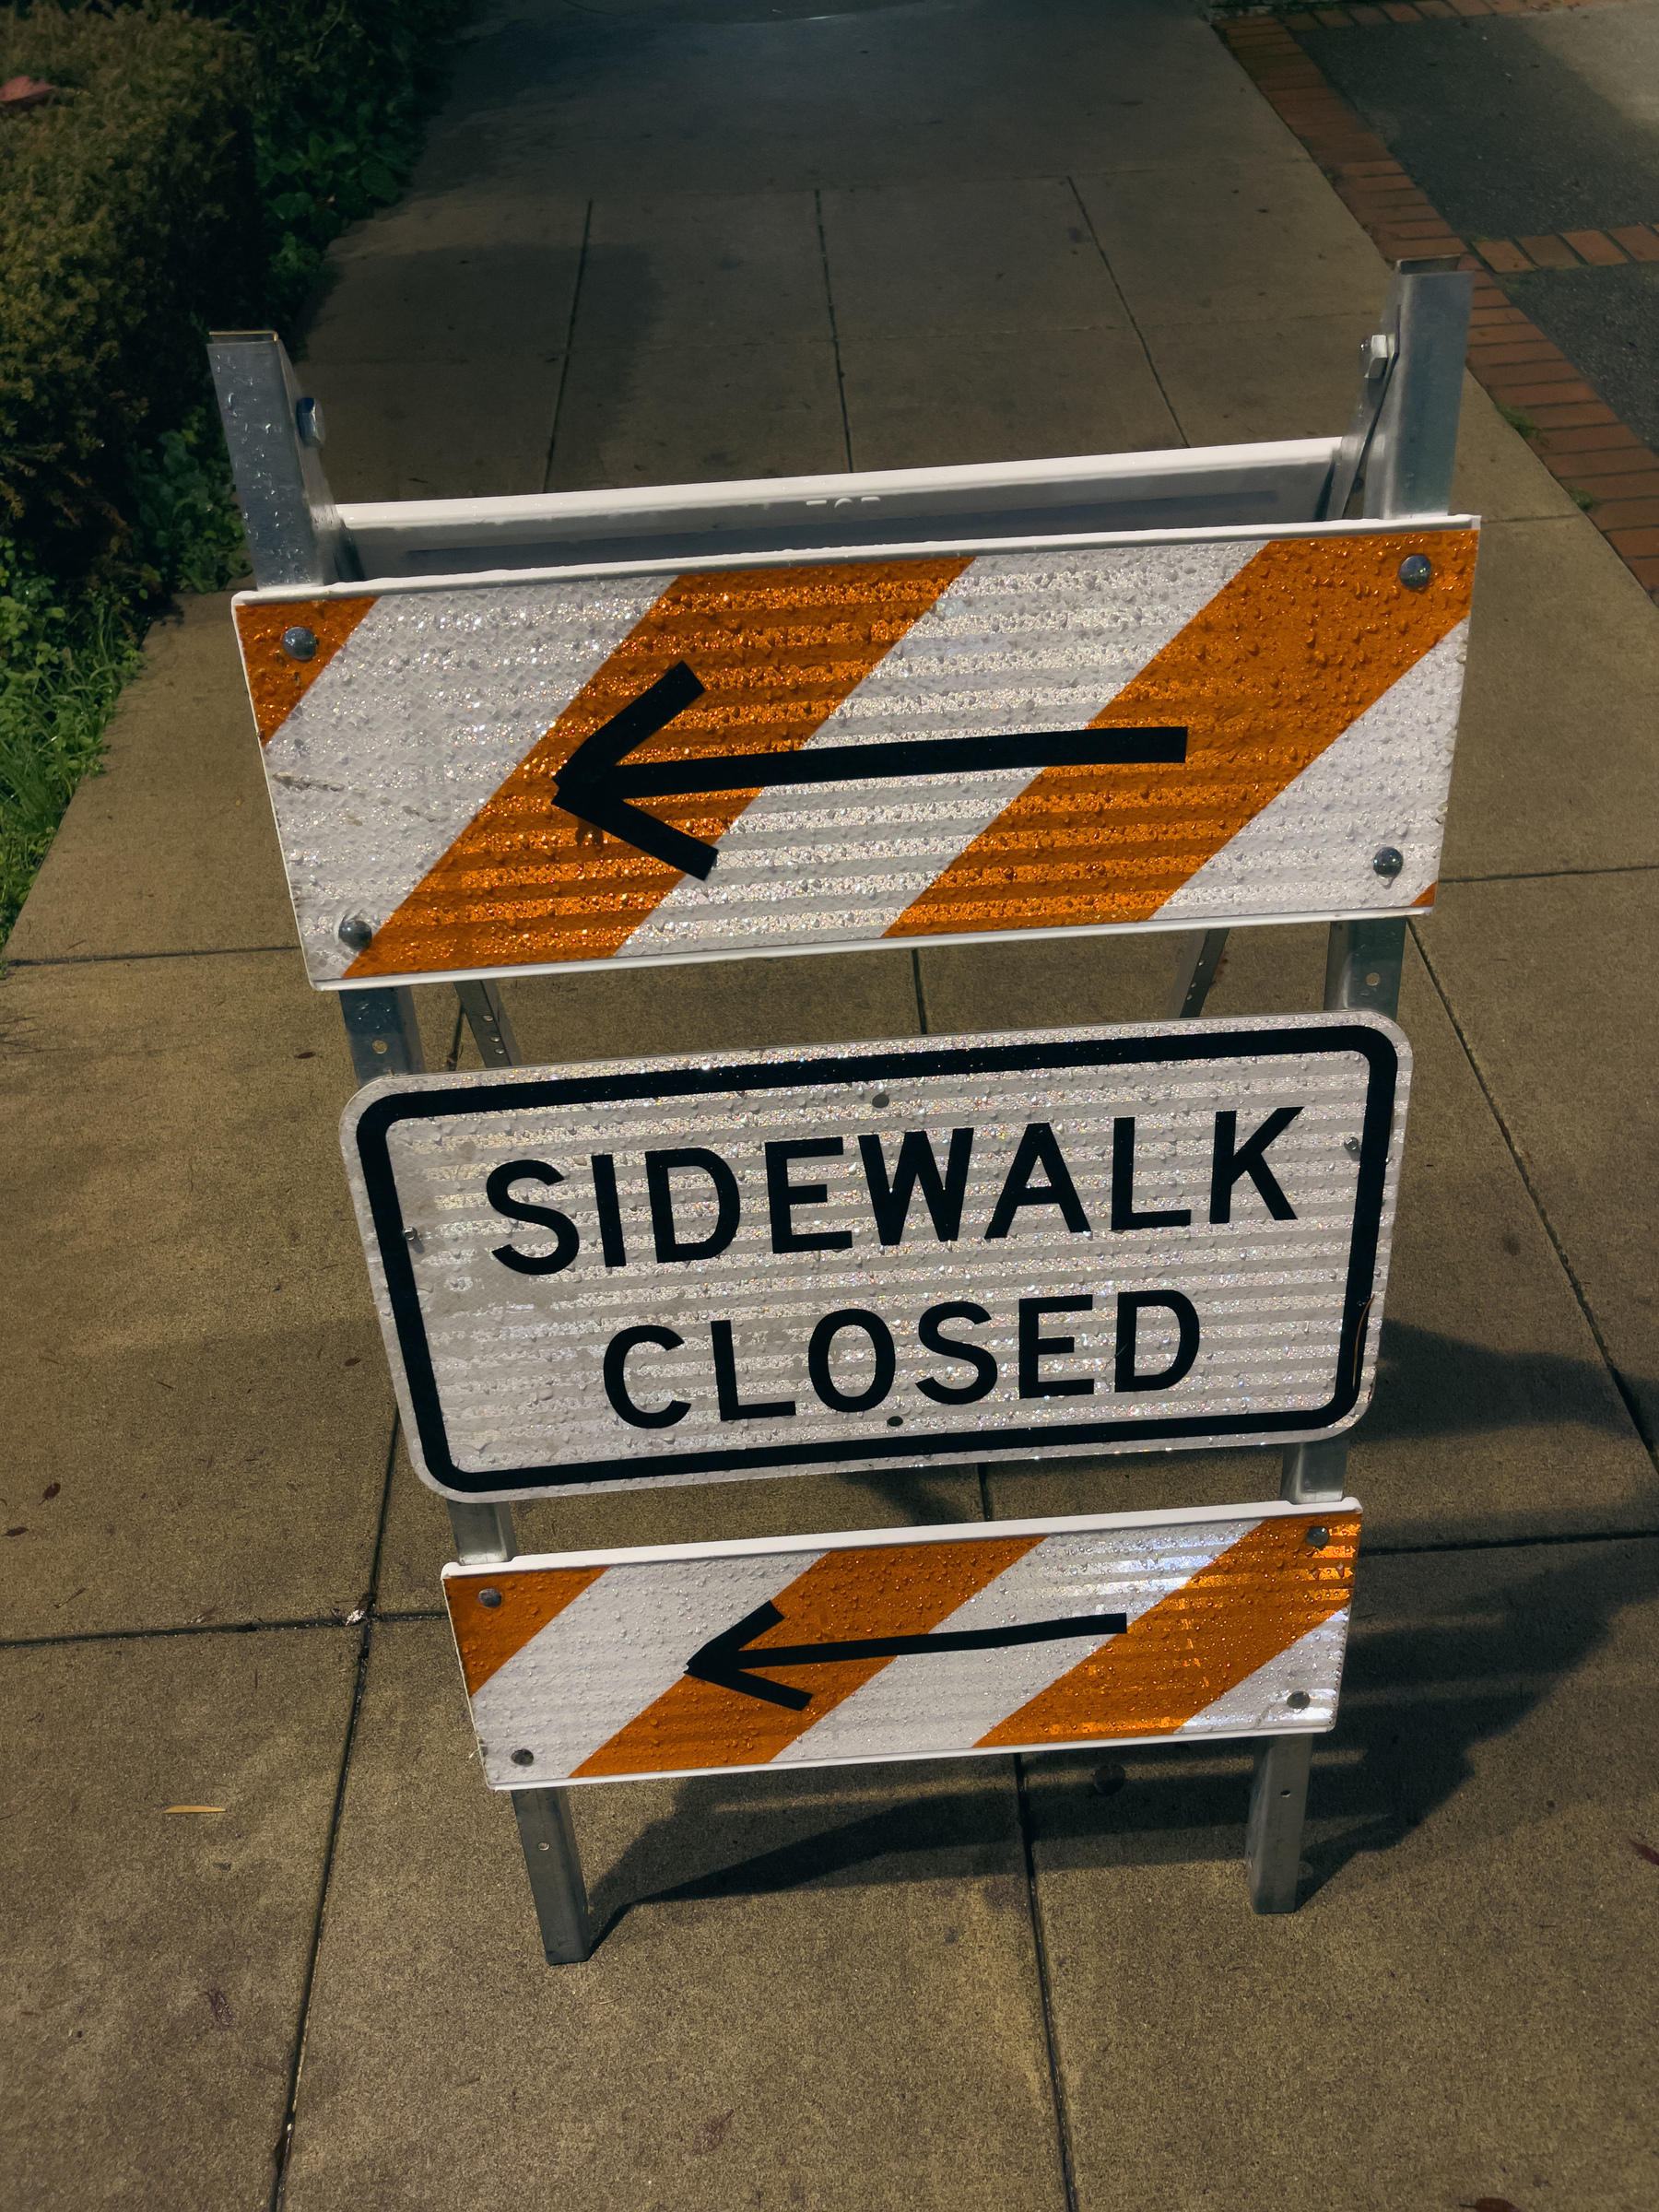 Sidewalk closed sandwich sign with directional arrow pointing to the left.